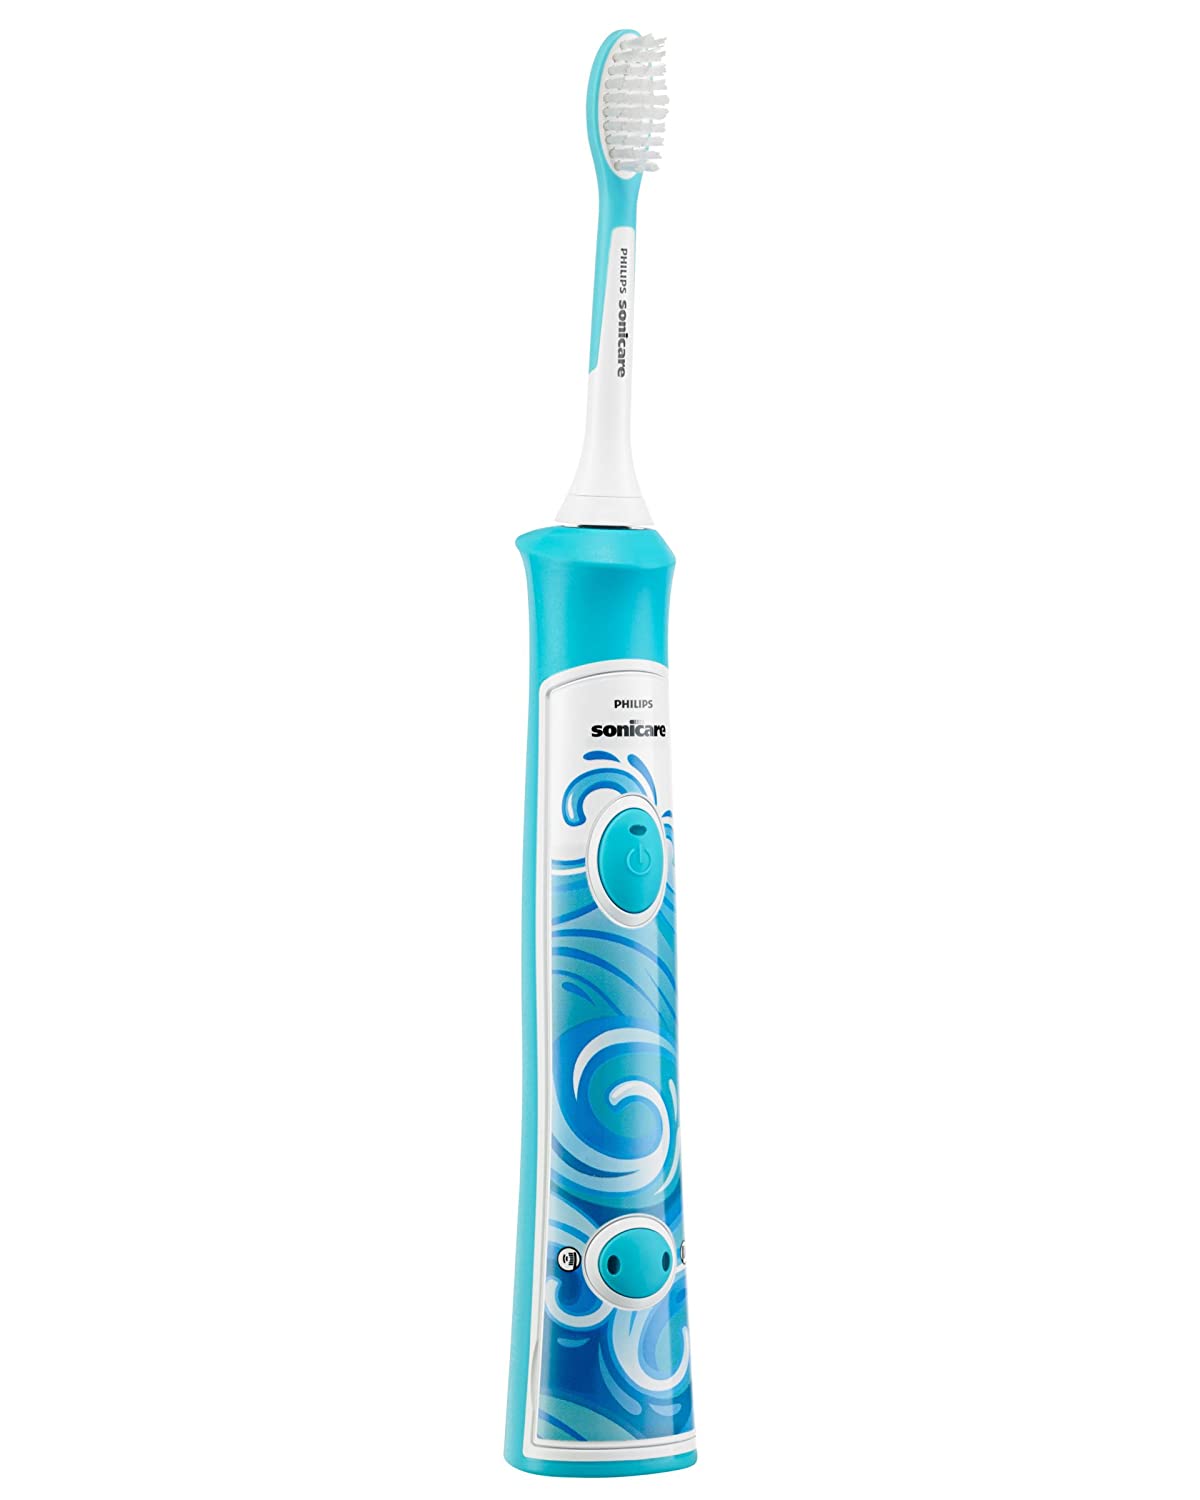 Philips Sonicare Rechargeable Toothbrush in Bahrain - Halabh